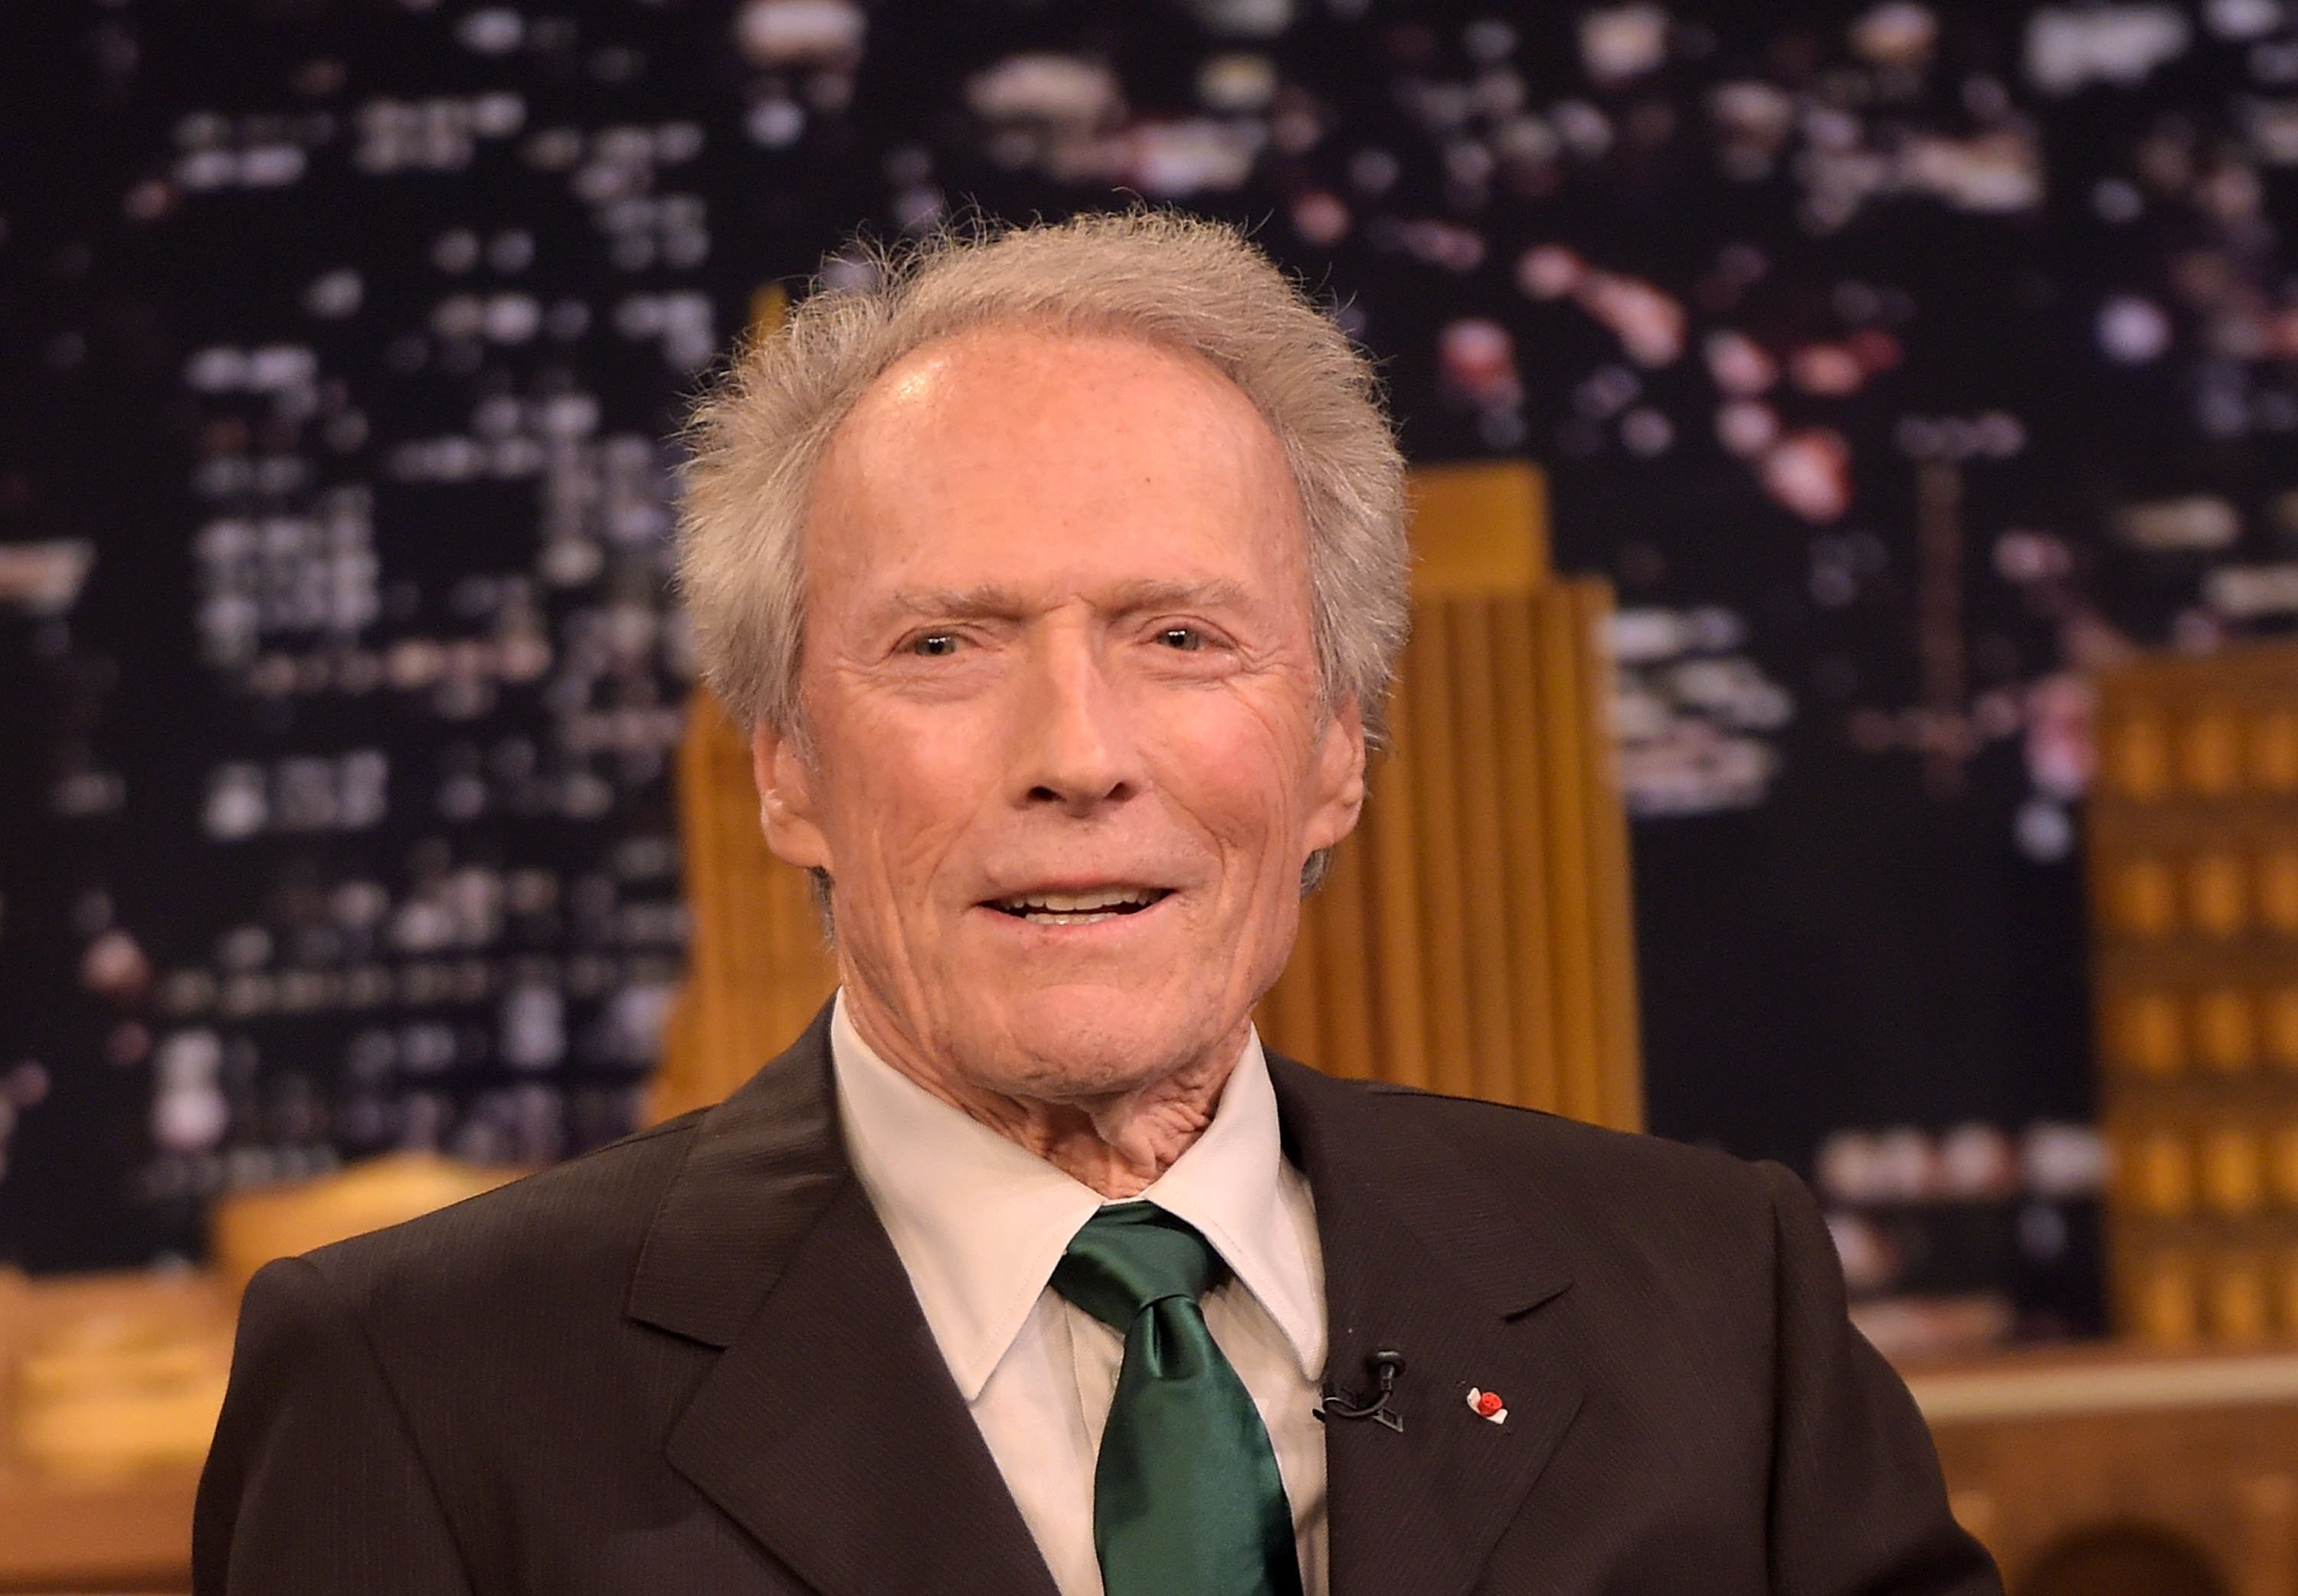 Clint Eastwood visits "The Tonight Show Starring Jimmy Fallon" at Rockefeller Center on September 6, 2016 in New York City | Photo: Getty Images